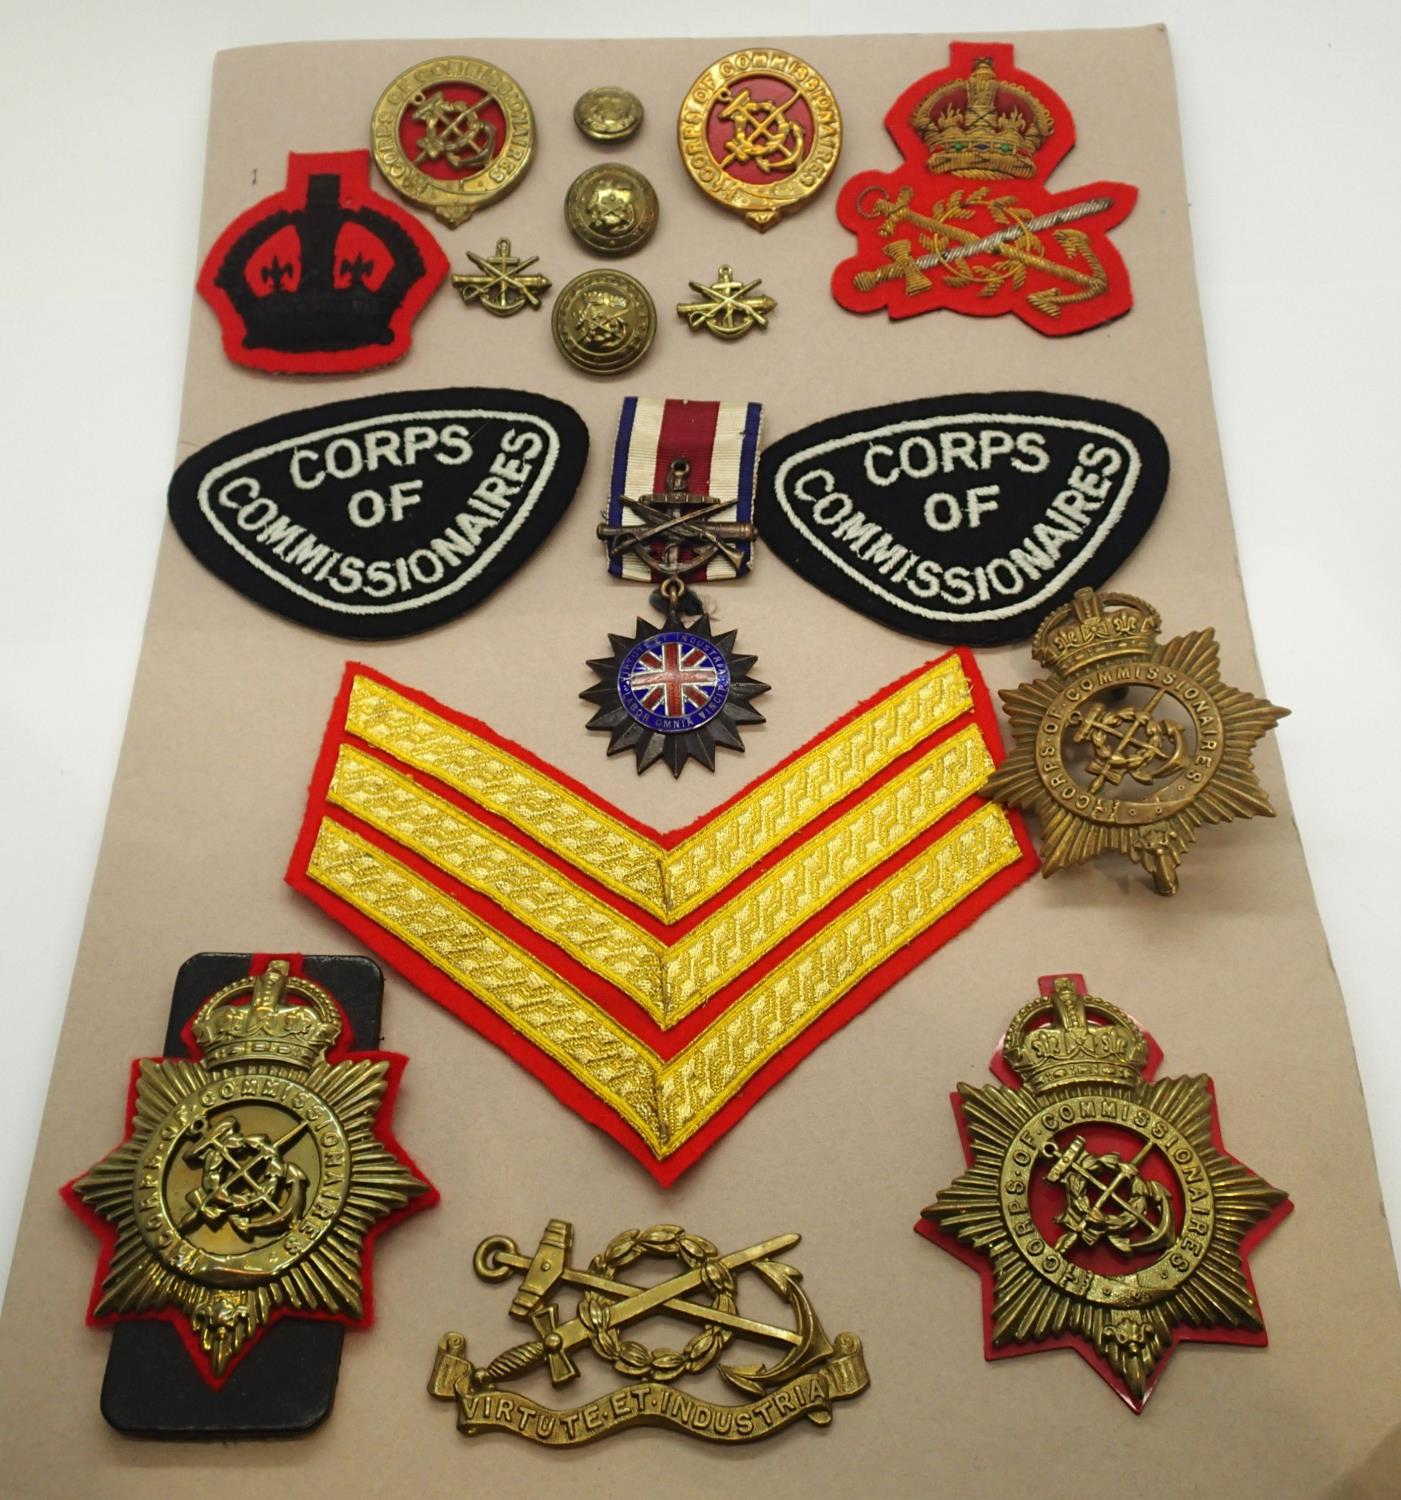 Corps of Commissionaires badges and medal. P&P Group 1 (£14+VAT for the first lot and £1+VAT for